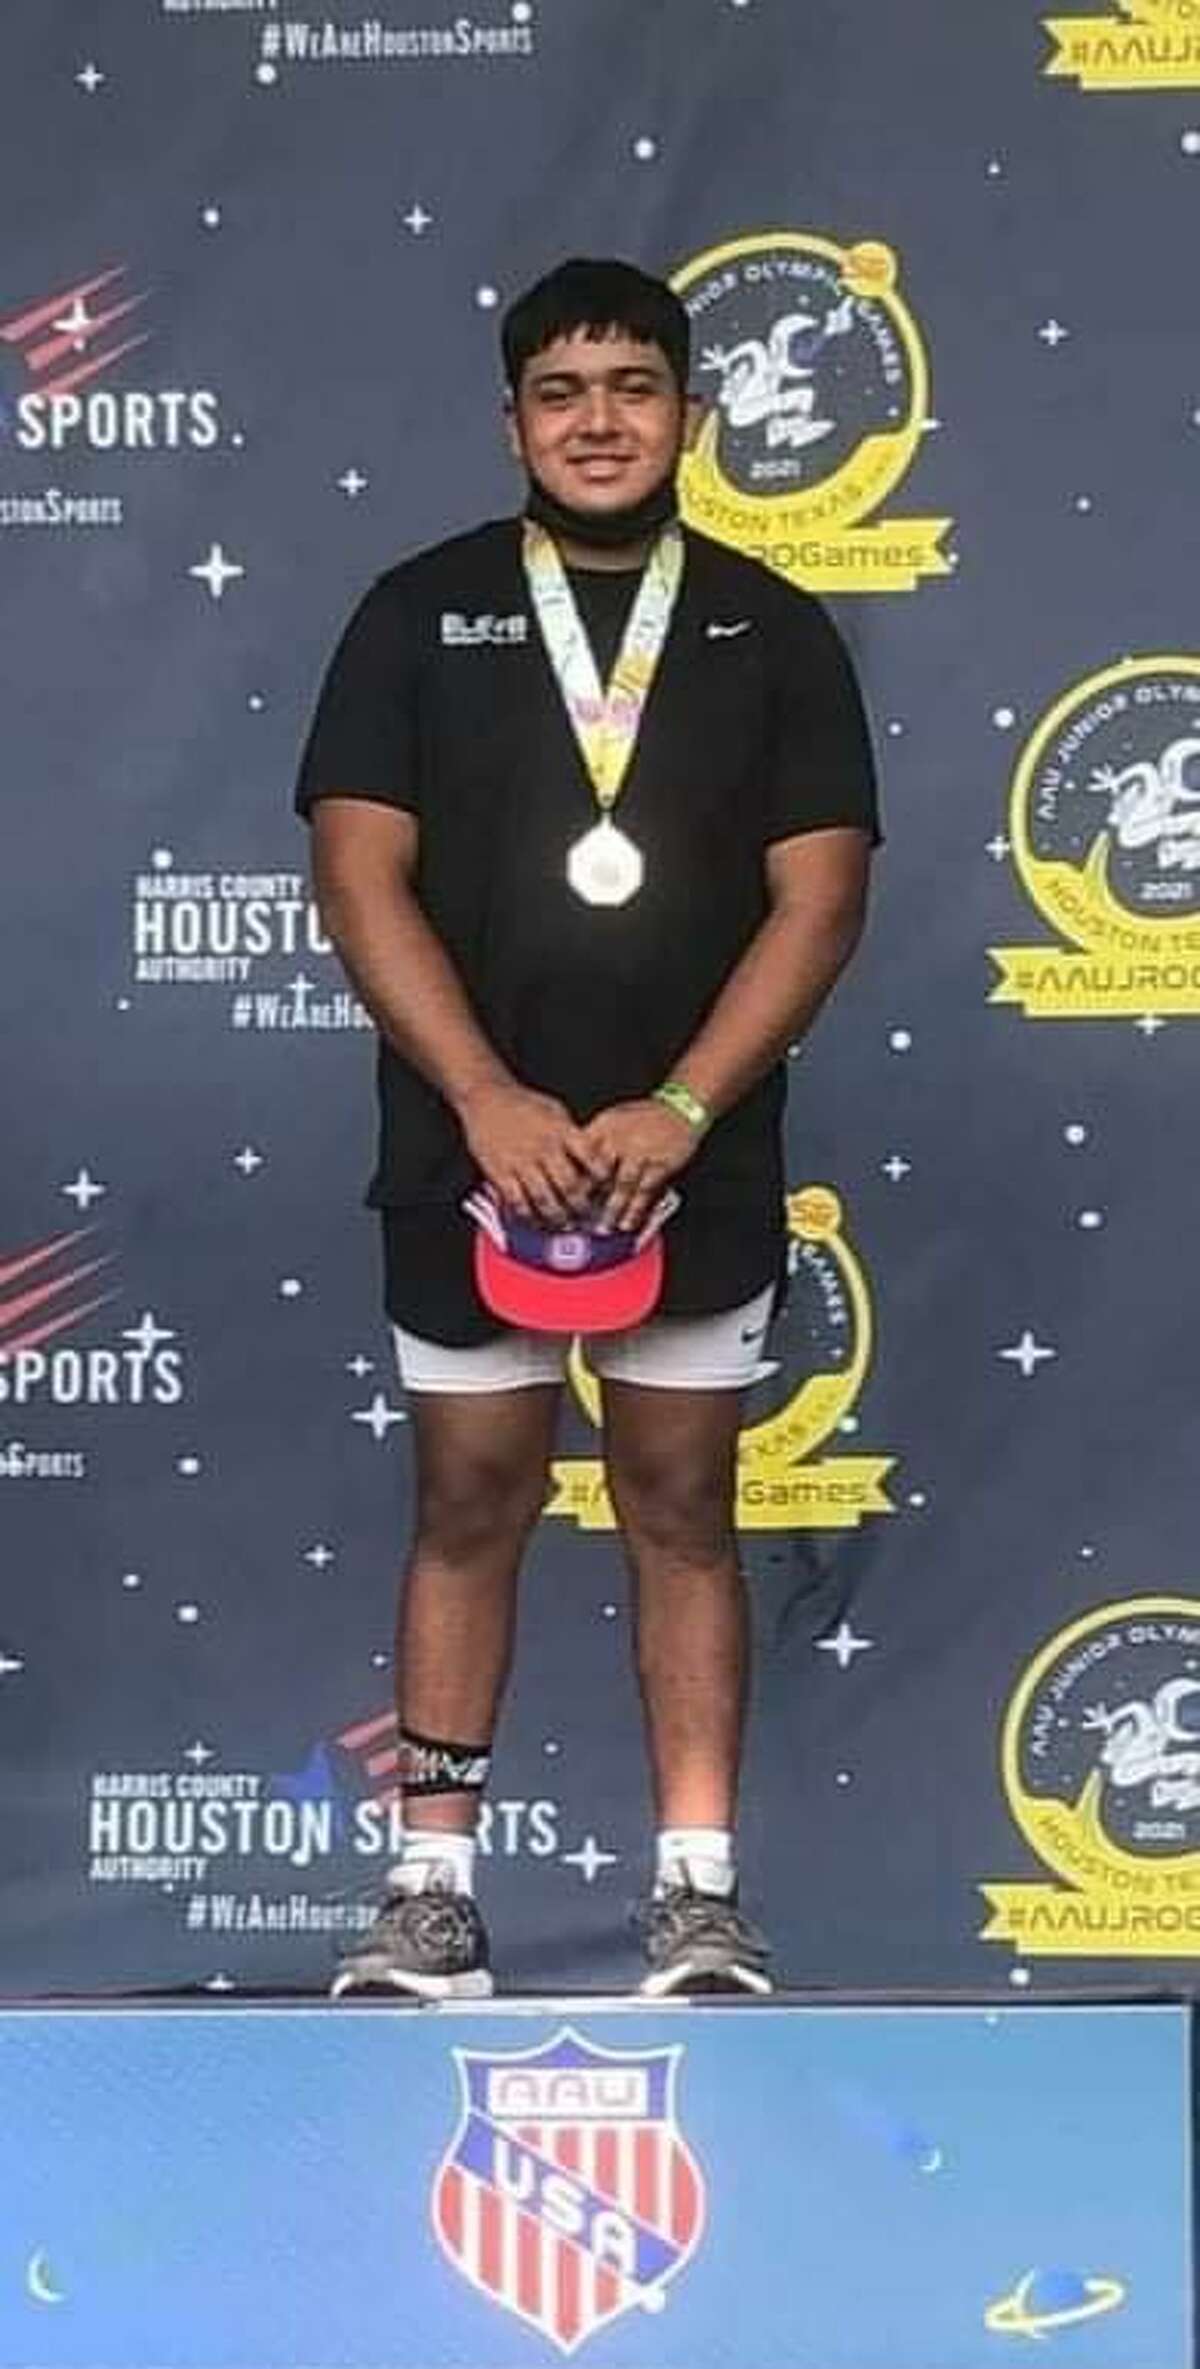 Julian Tijerina earned a gold medal in the shot put at the AAU Junior Olympics in Houston.